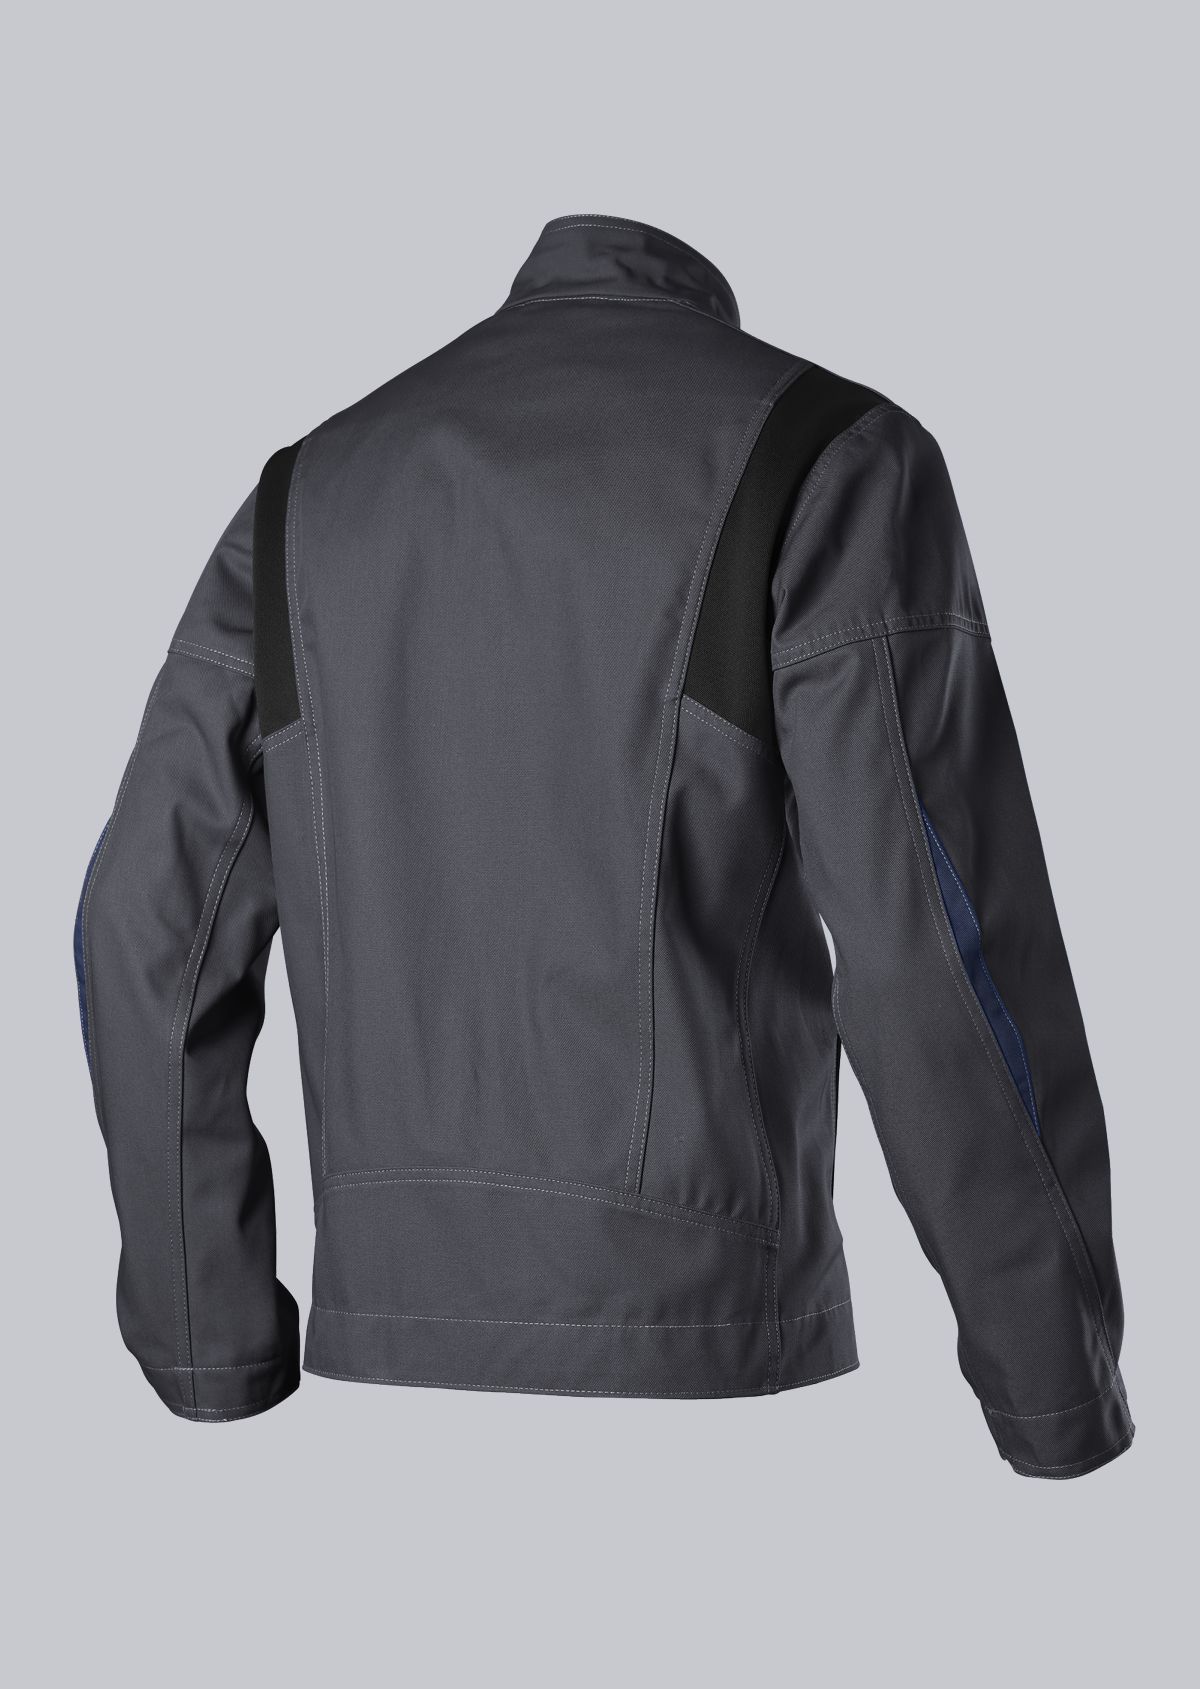 BP® Comfort work jacket with stretch inserts